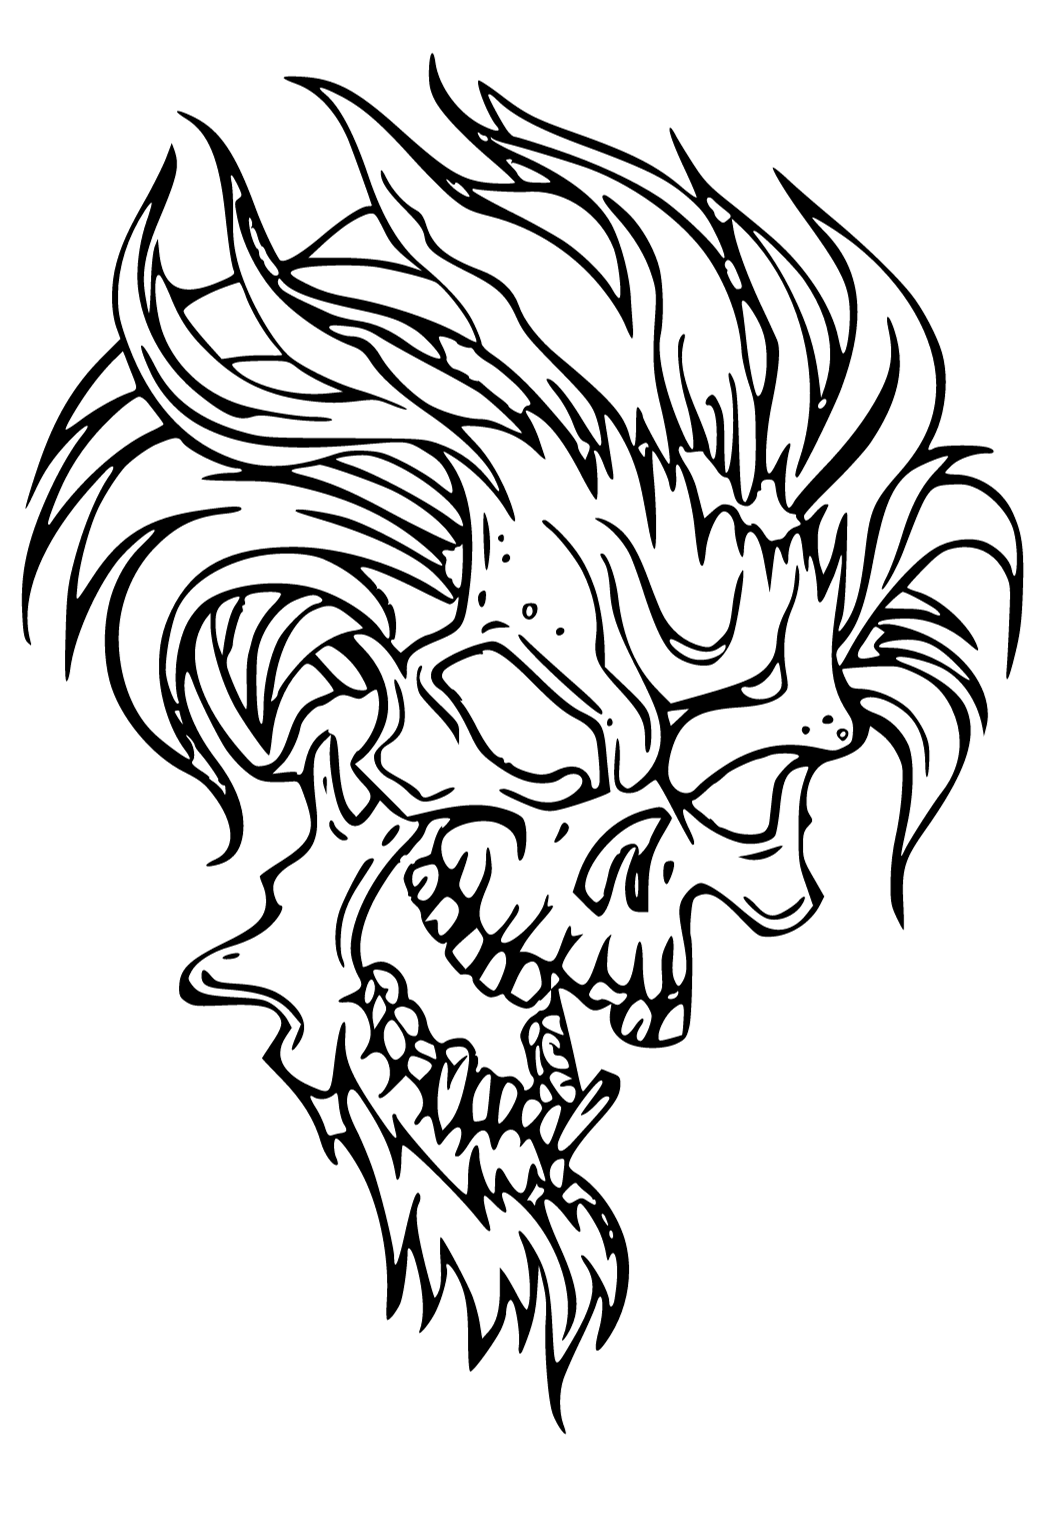 Free Printable Demon Horrible Coloring Page for Adults and Kids ...